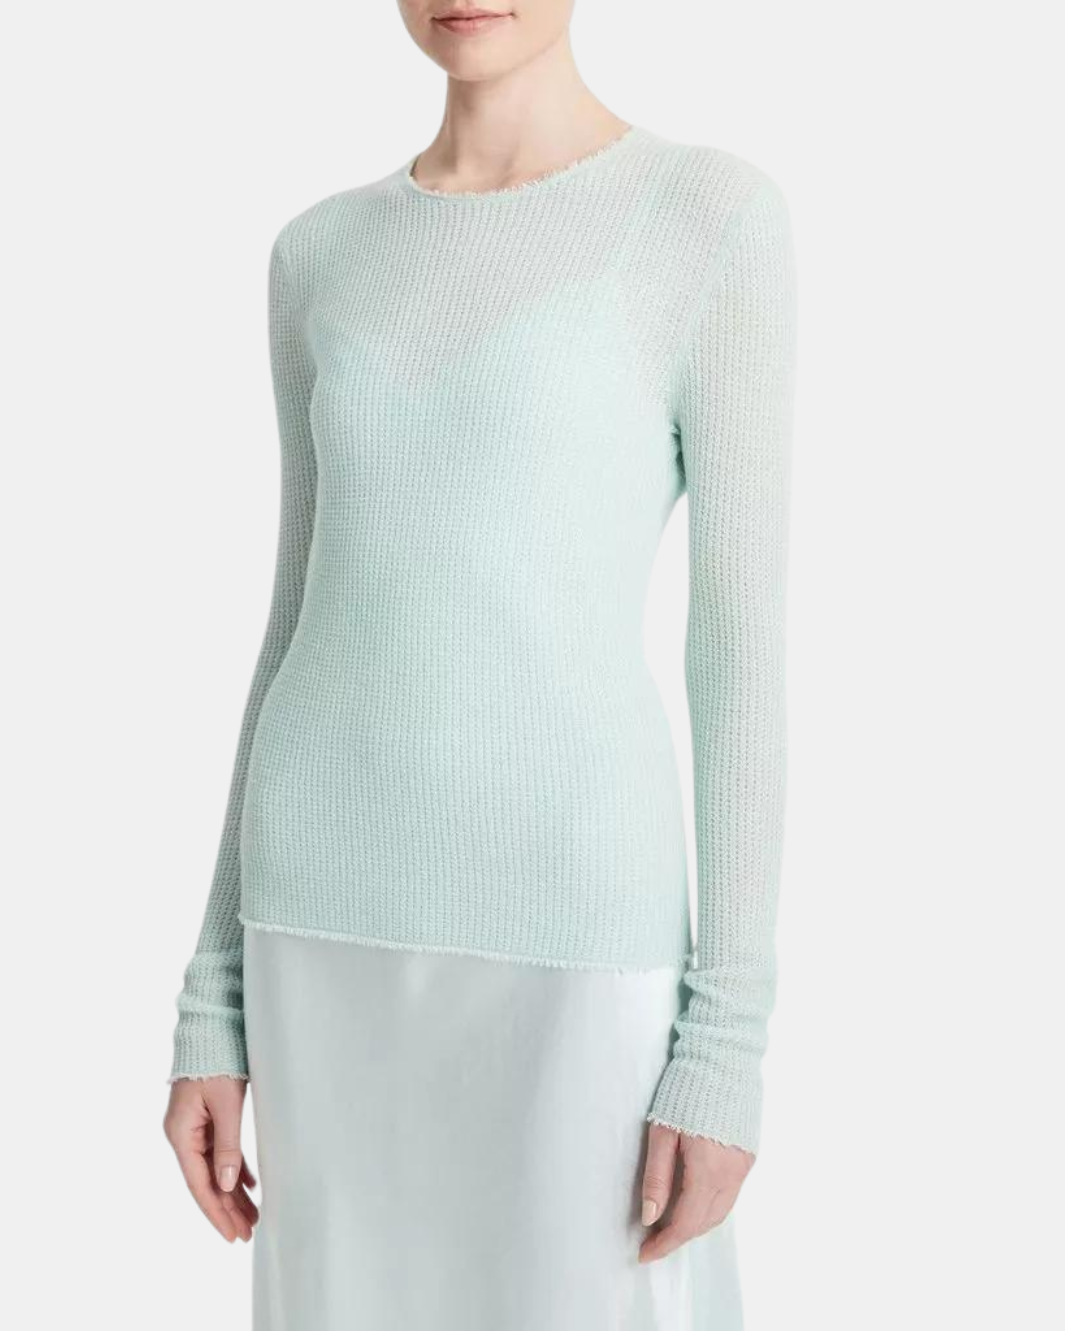 WAFFLE STITCHED CASHMERE SILK SWEATER IN SEA STAR - Romi Boutique